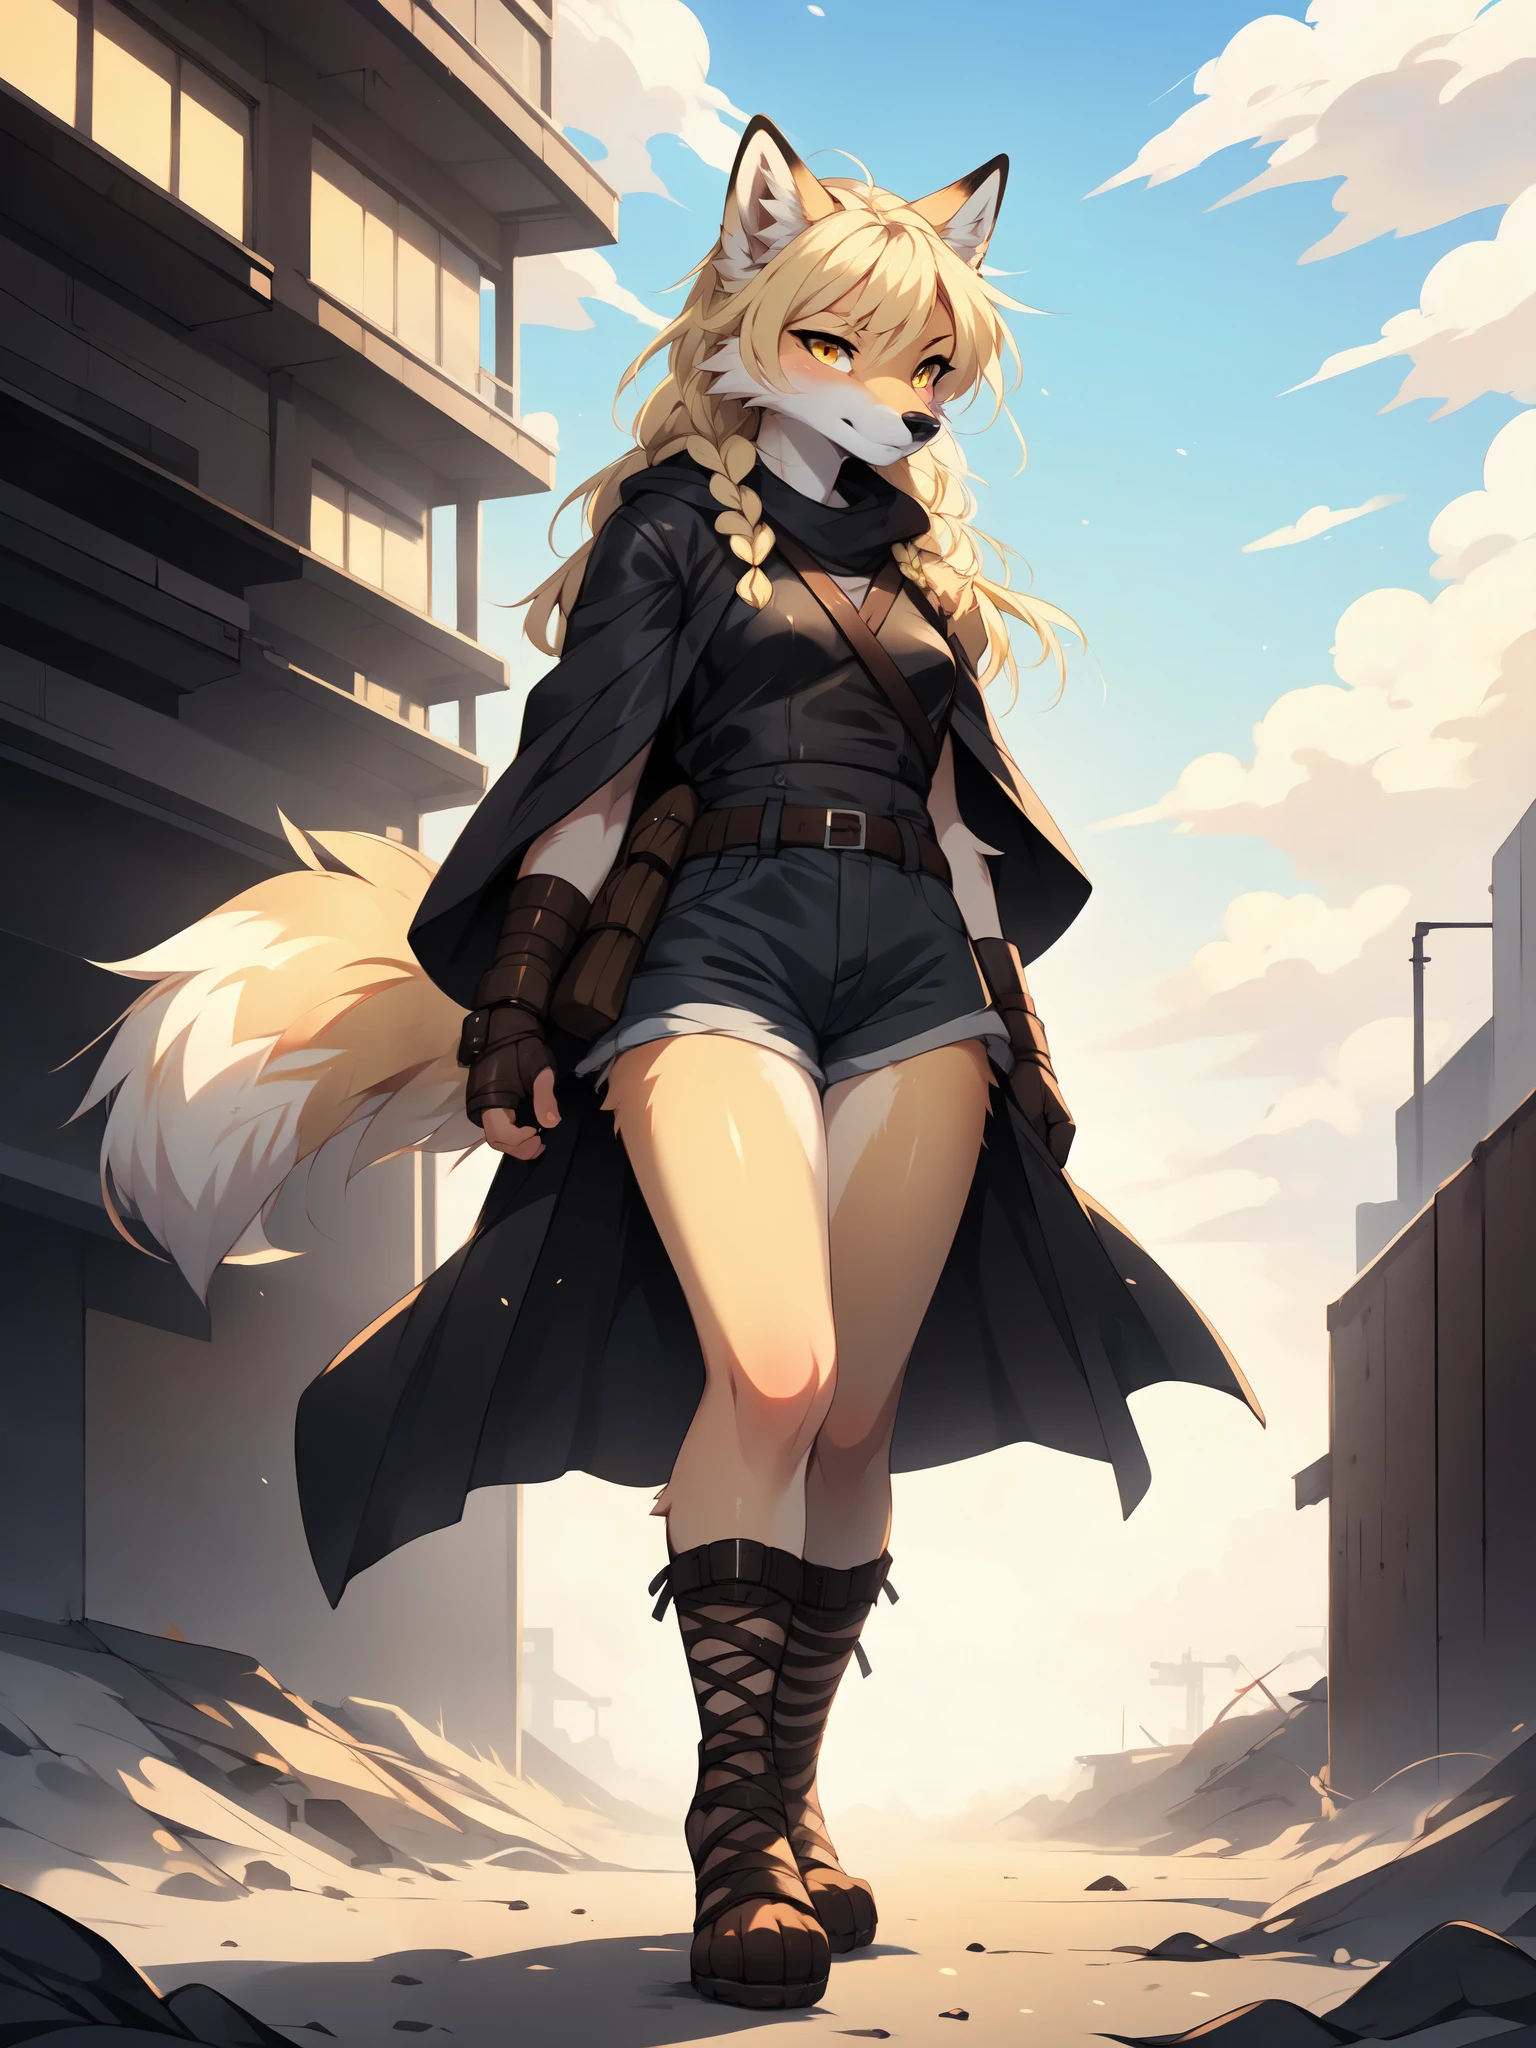 By fumiko, by hyattlen, by hioshiru, solo, tan fox girl, blonde hair, yellow eyes, cute snout, black nose, blonde fox tail, wearing brown cloak, leather armor top, leather short shorts, foot wraps, leather gauntlets, exposed fingers, feet wrapped in bandages, exposed toes, holding a sniper rifle with both hands   BREAK     in a post apocalyptic world, walking, looking concerned, wide open scene, foggy, 